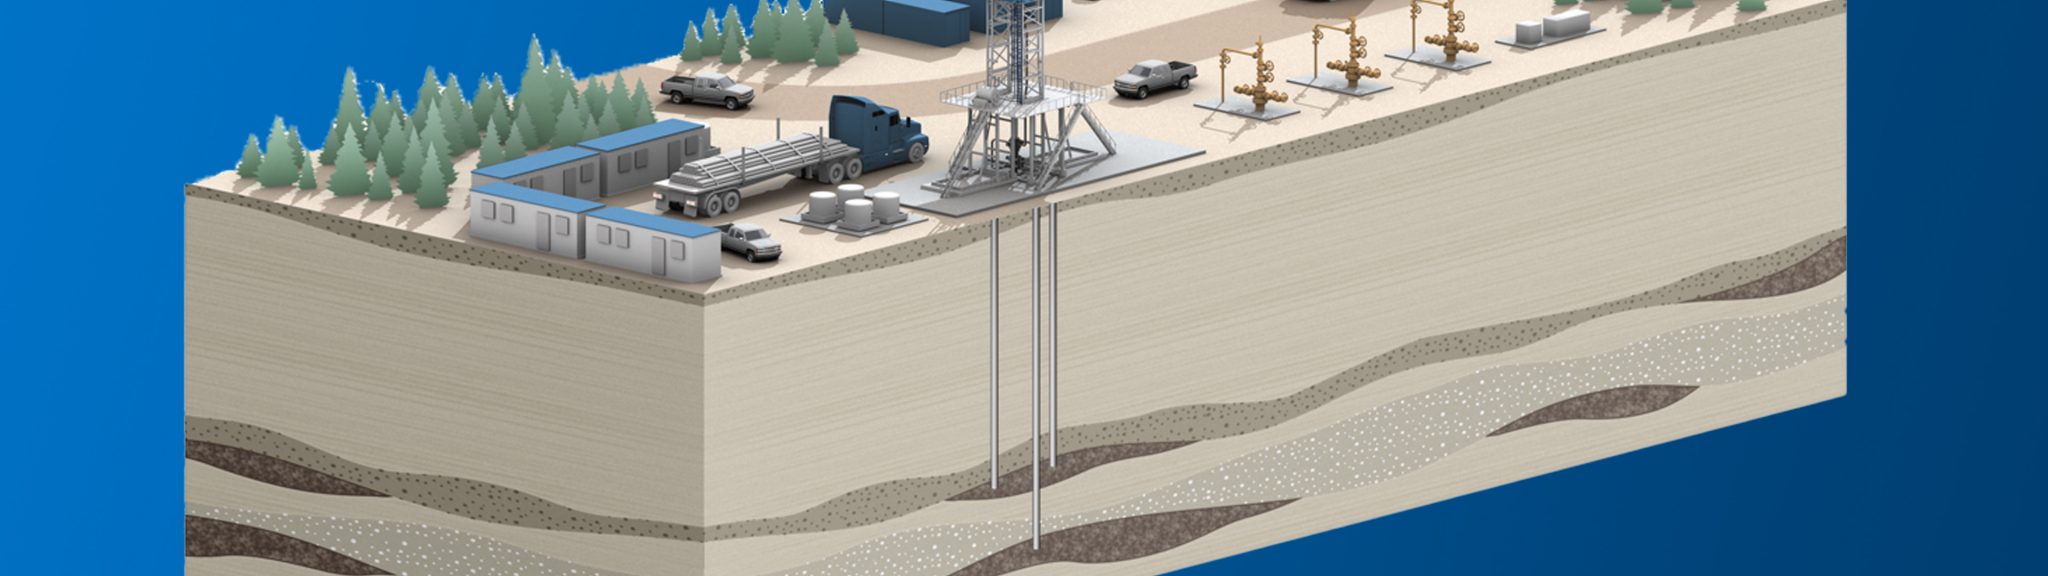 A rendering of a drill site where a natural gas deposit or reservoir has been tapped for extraction